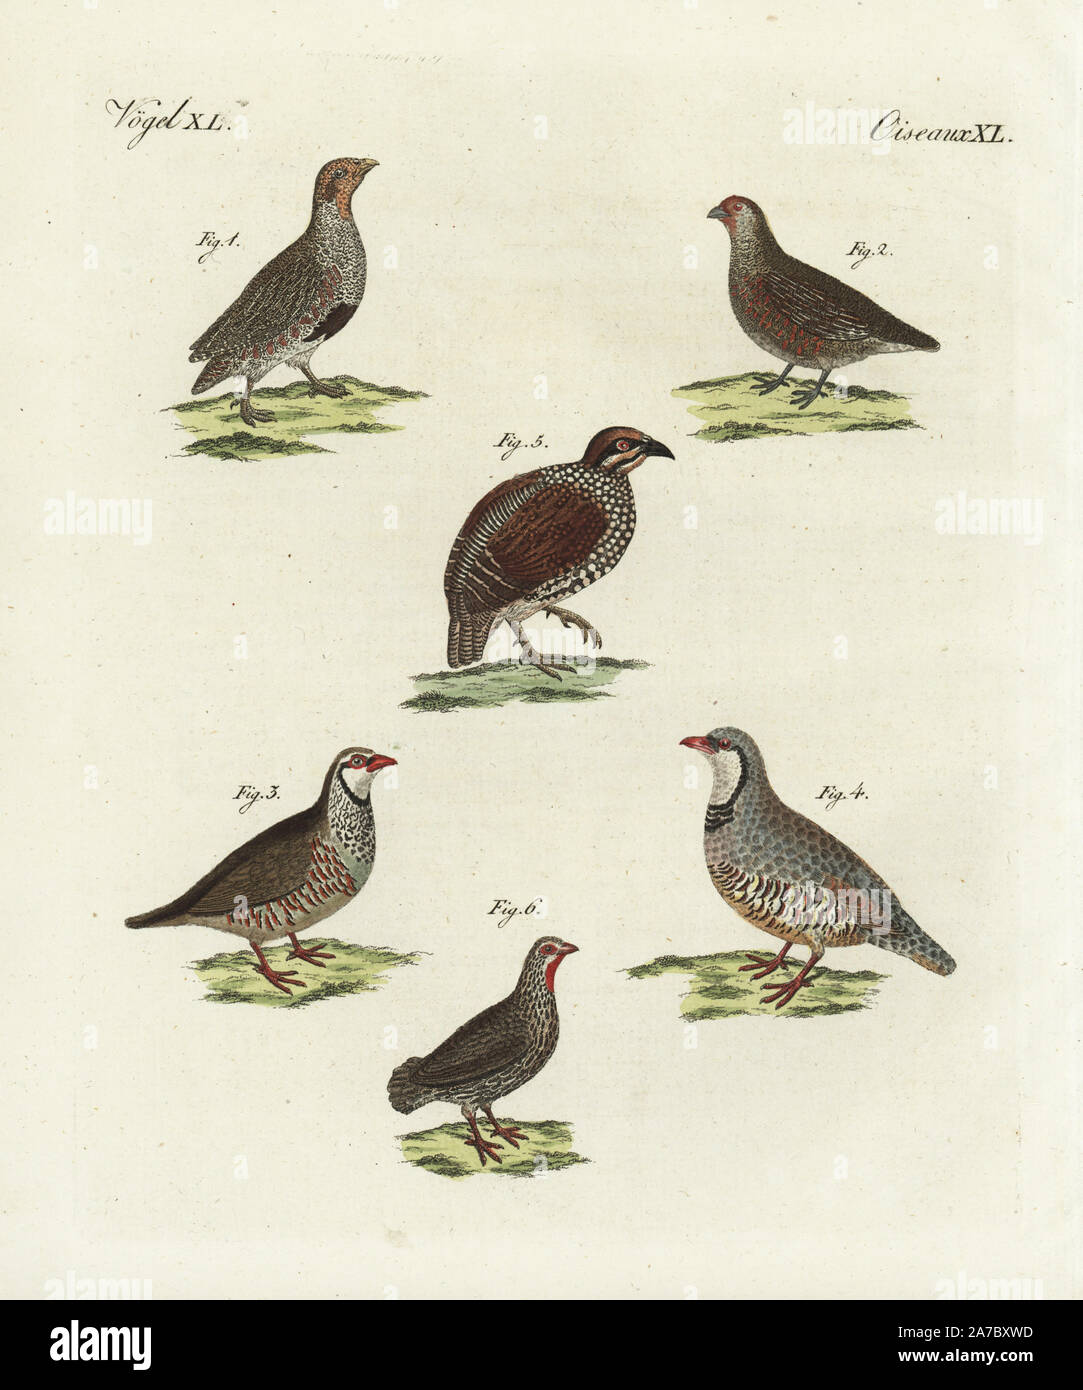 Grey partridge, Perdix perdix, male 1 and female 2, red-legged partridge, Alectoris rufa 3, rock partridge, Alectoris graeca 4, Chinese Francolin, Francolinus pintadeanus 5, and red-necked spurfowl, Pternistis afer 6. Handcoloured copperplate engraving from Bertuch's 'Bilderbuch fur Kinder' (Picture Book for Children), Weimar, 1798. Friedrich Johann Bertuch (1747-1822) was a German publisher and man of arts most famous for his 12-volume encyclopedia for children illustrated with 1,200 engraved plates on natural history, science, costume, mythology, etc., published from 1790-1830. Stock Photo